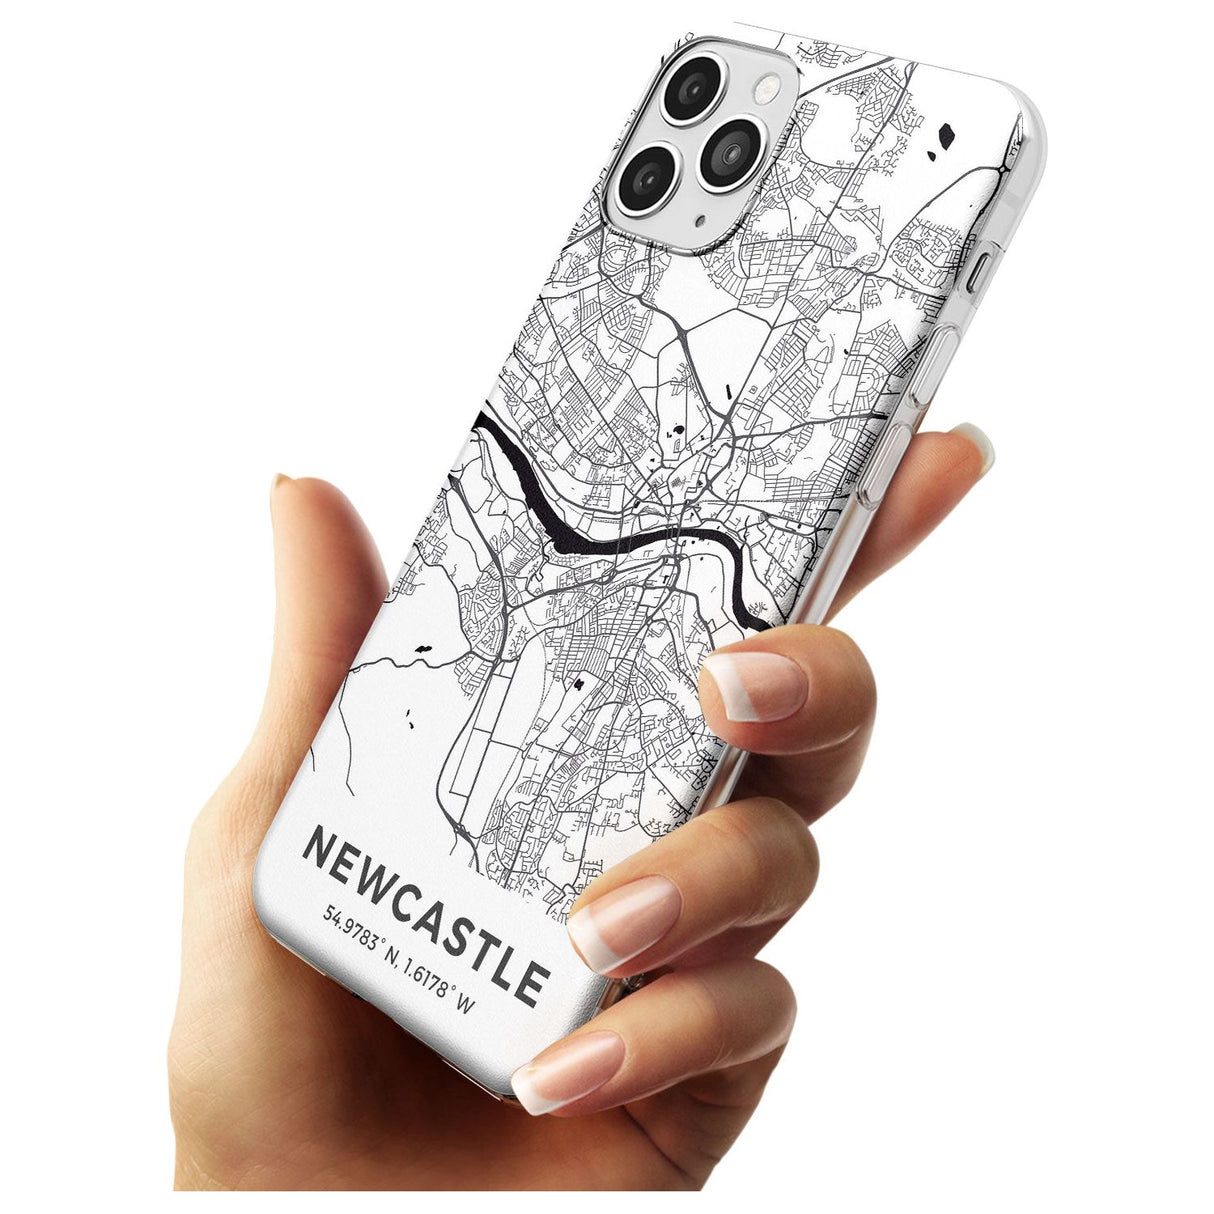 Map of Newcastle, England Slim TPU Phone Case for iPhone 11 Pro Max